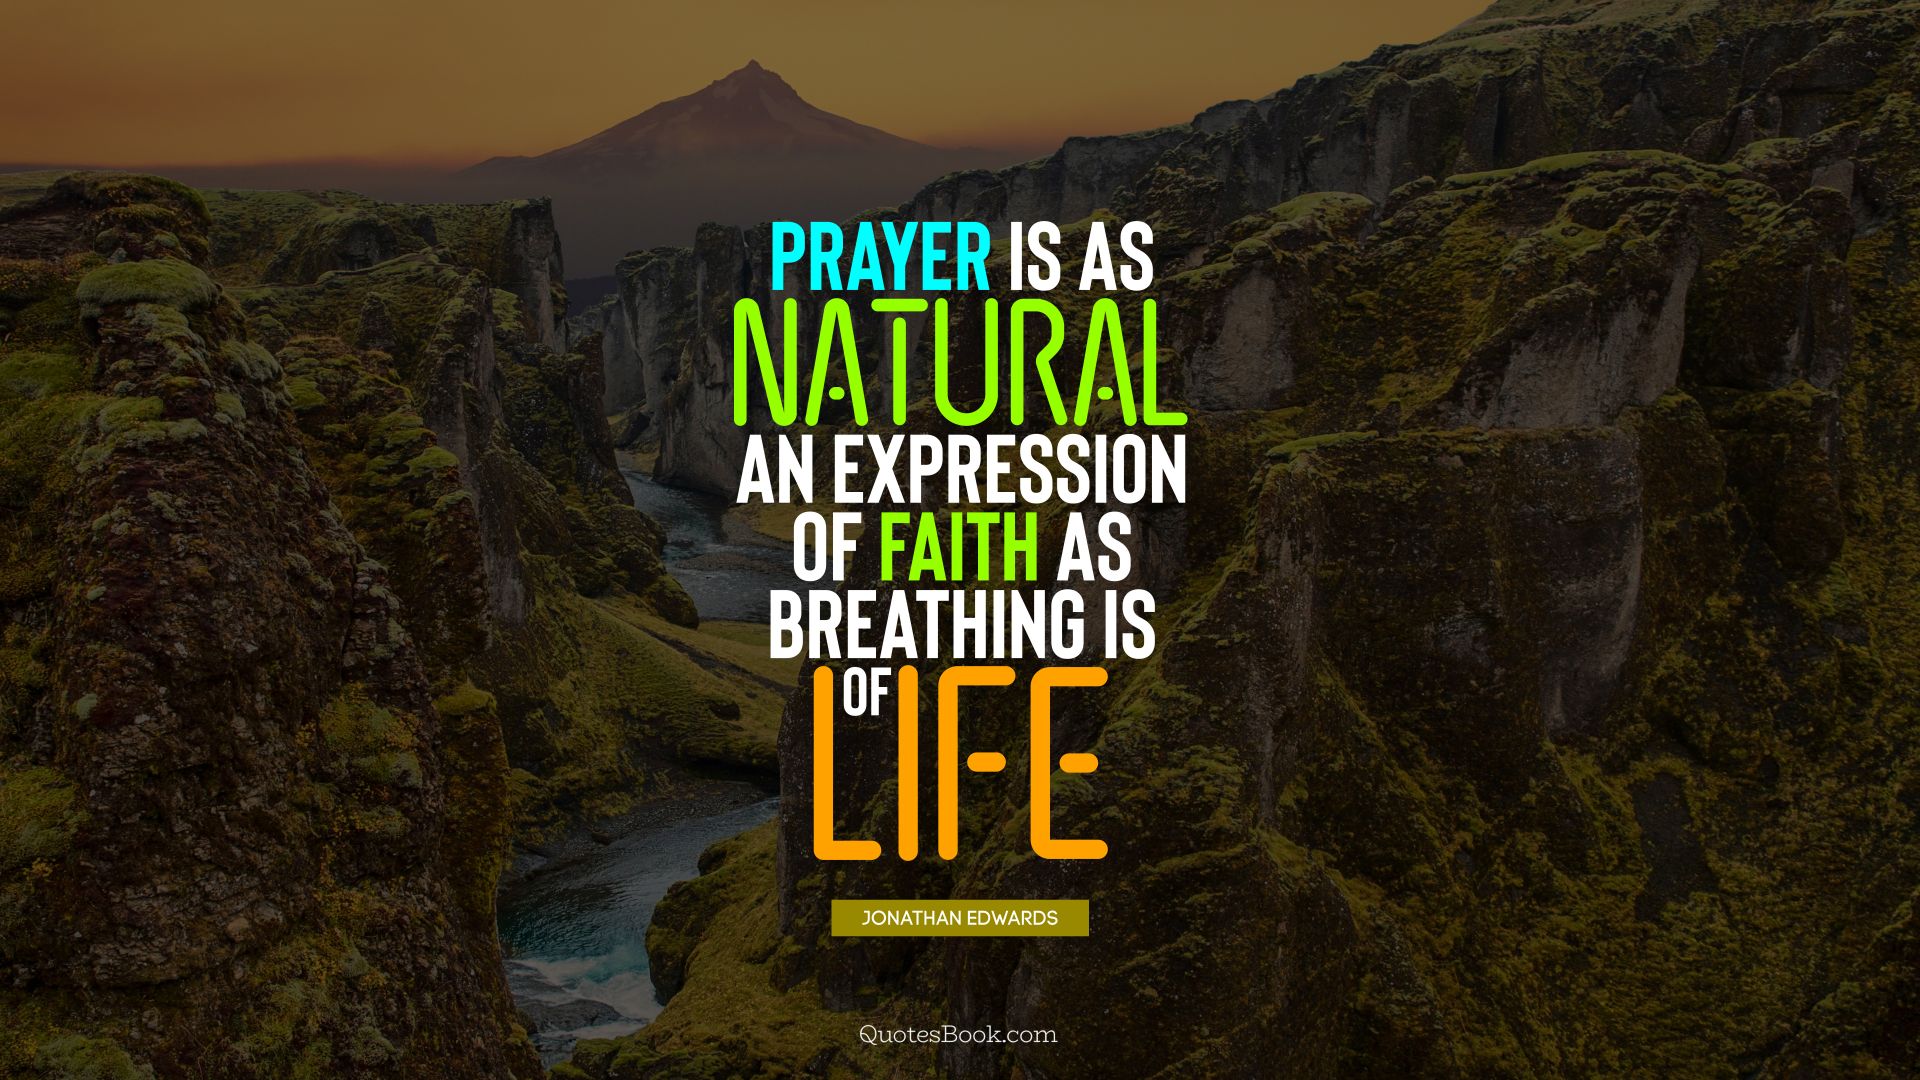 Prayer is as natural an expression of faith as breathing is of life. - Quote by Jonathan Edwards